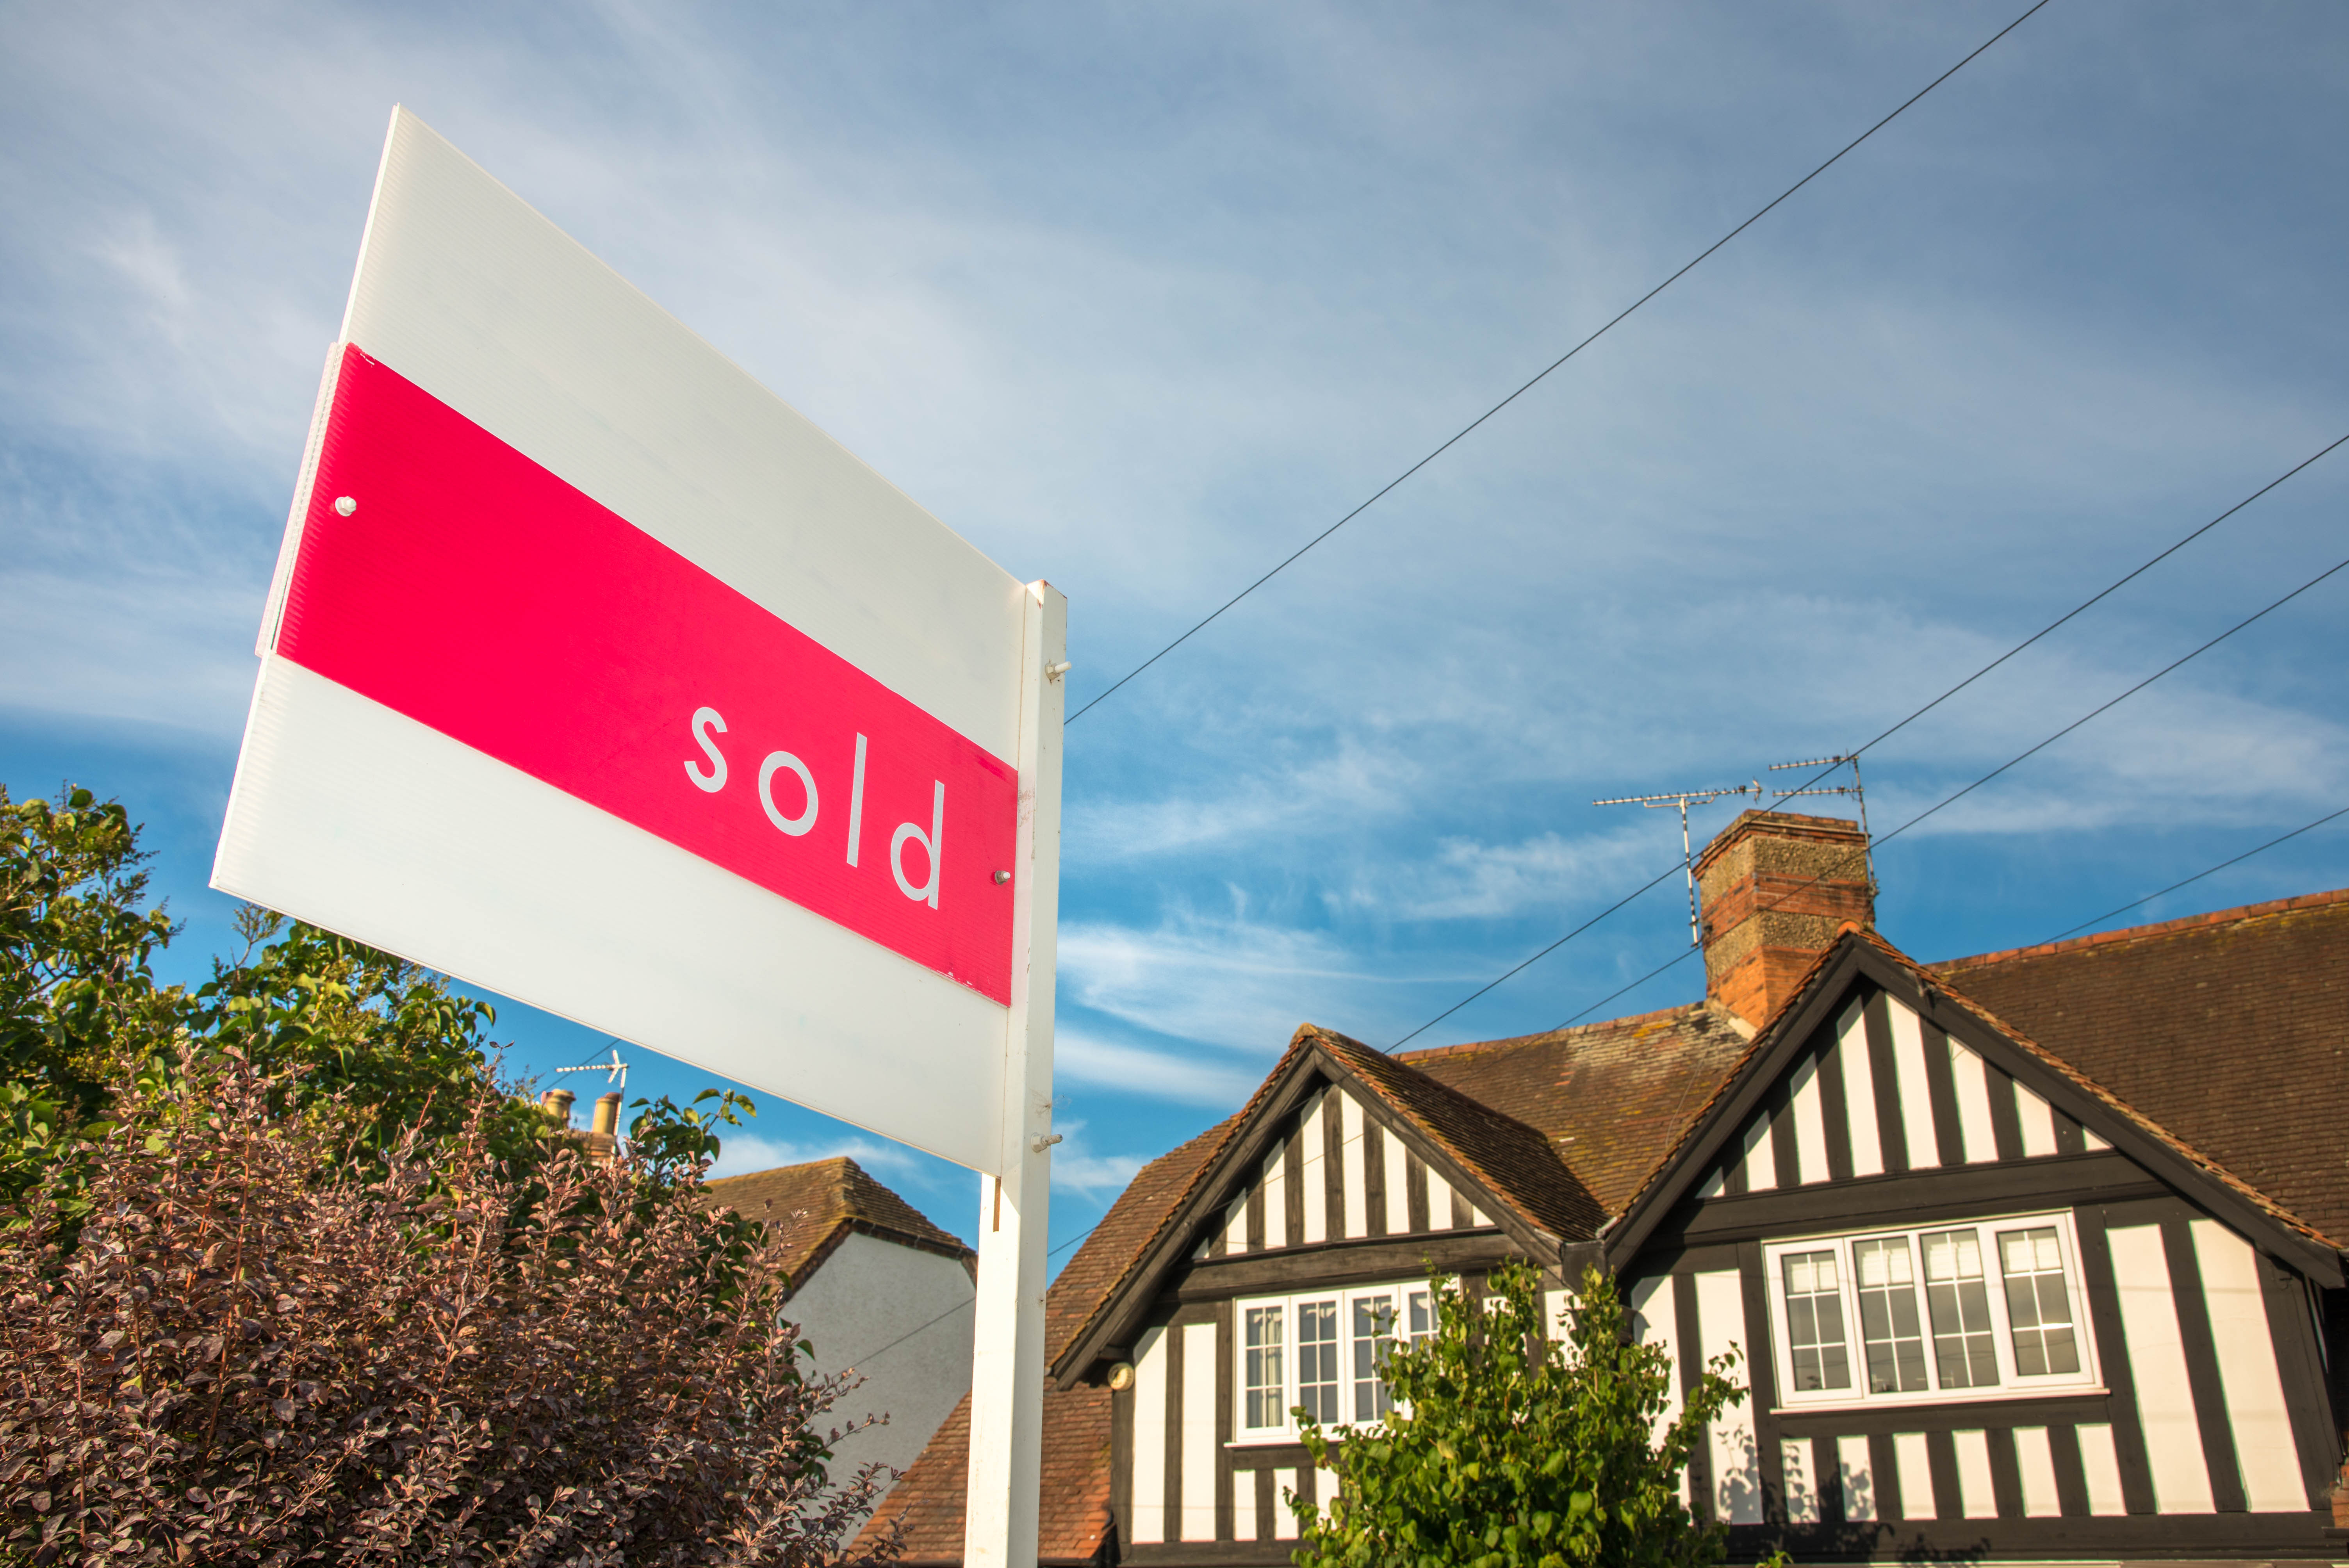 Rightmove sales pipeline reaches highest point in decade